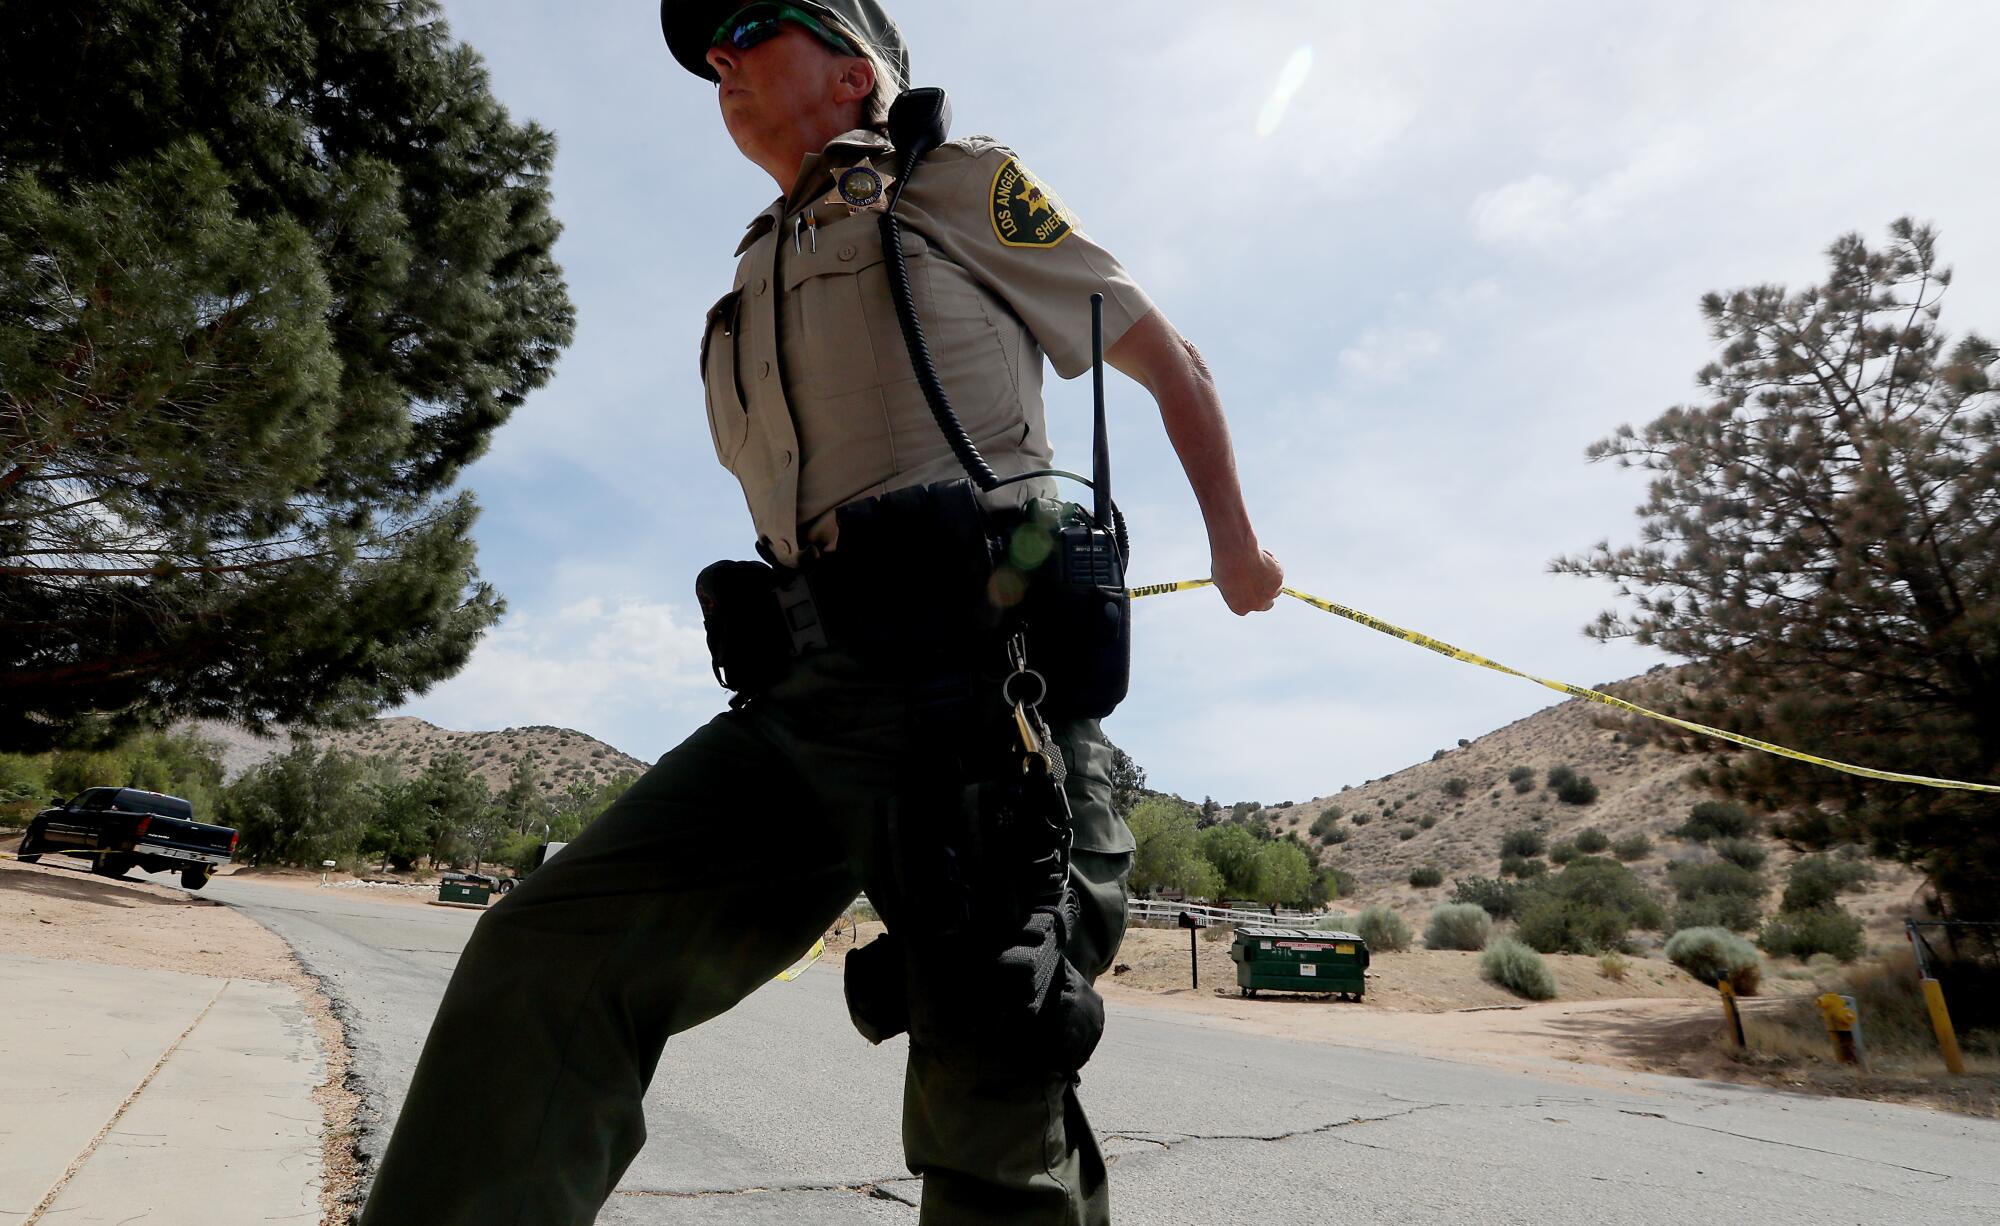 A deputy stretches police tape across a street surrounded by low, scrub-covered hills.